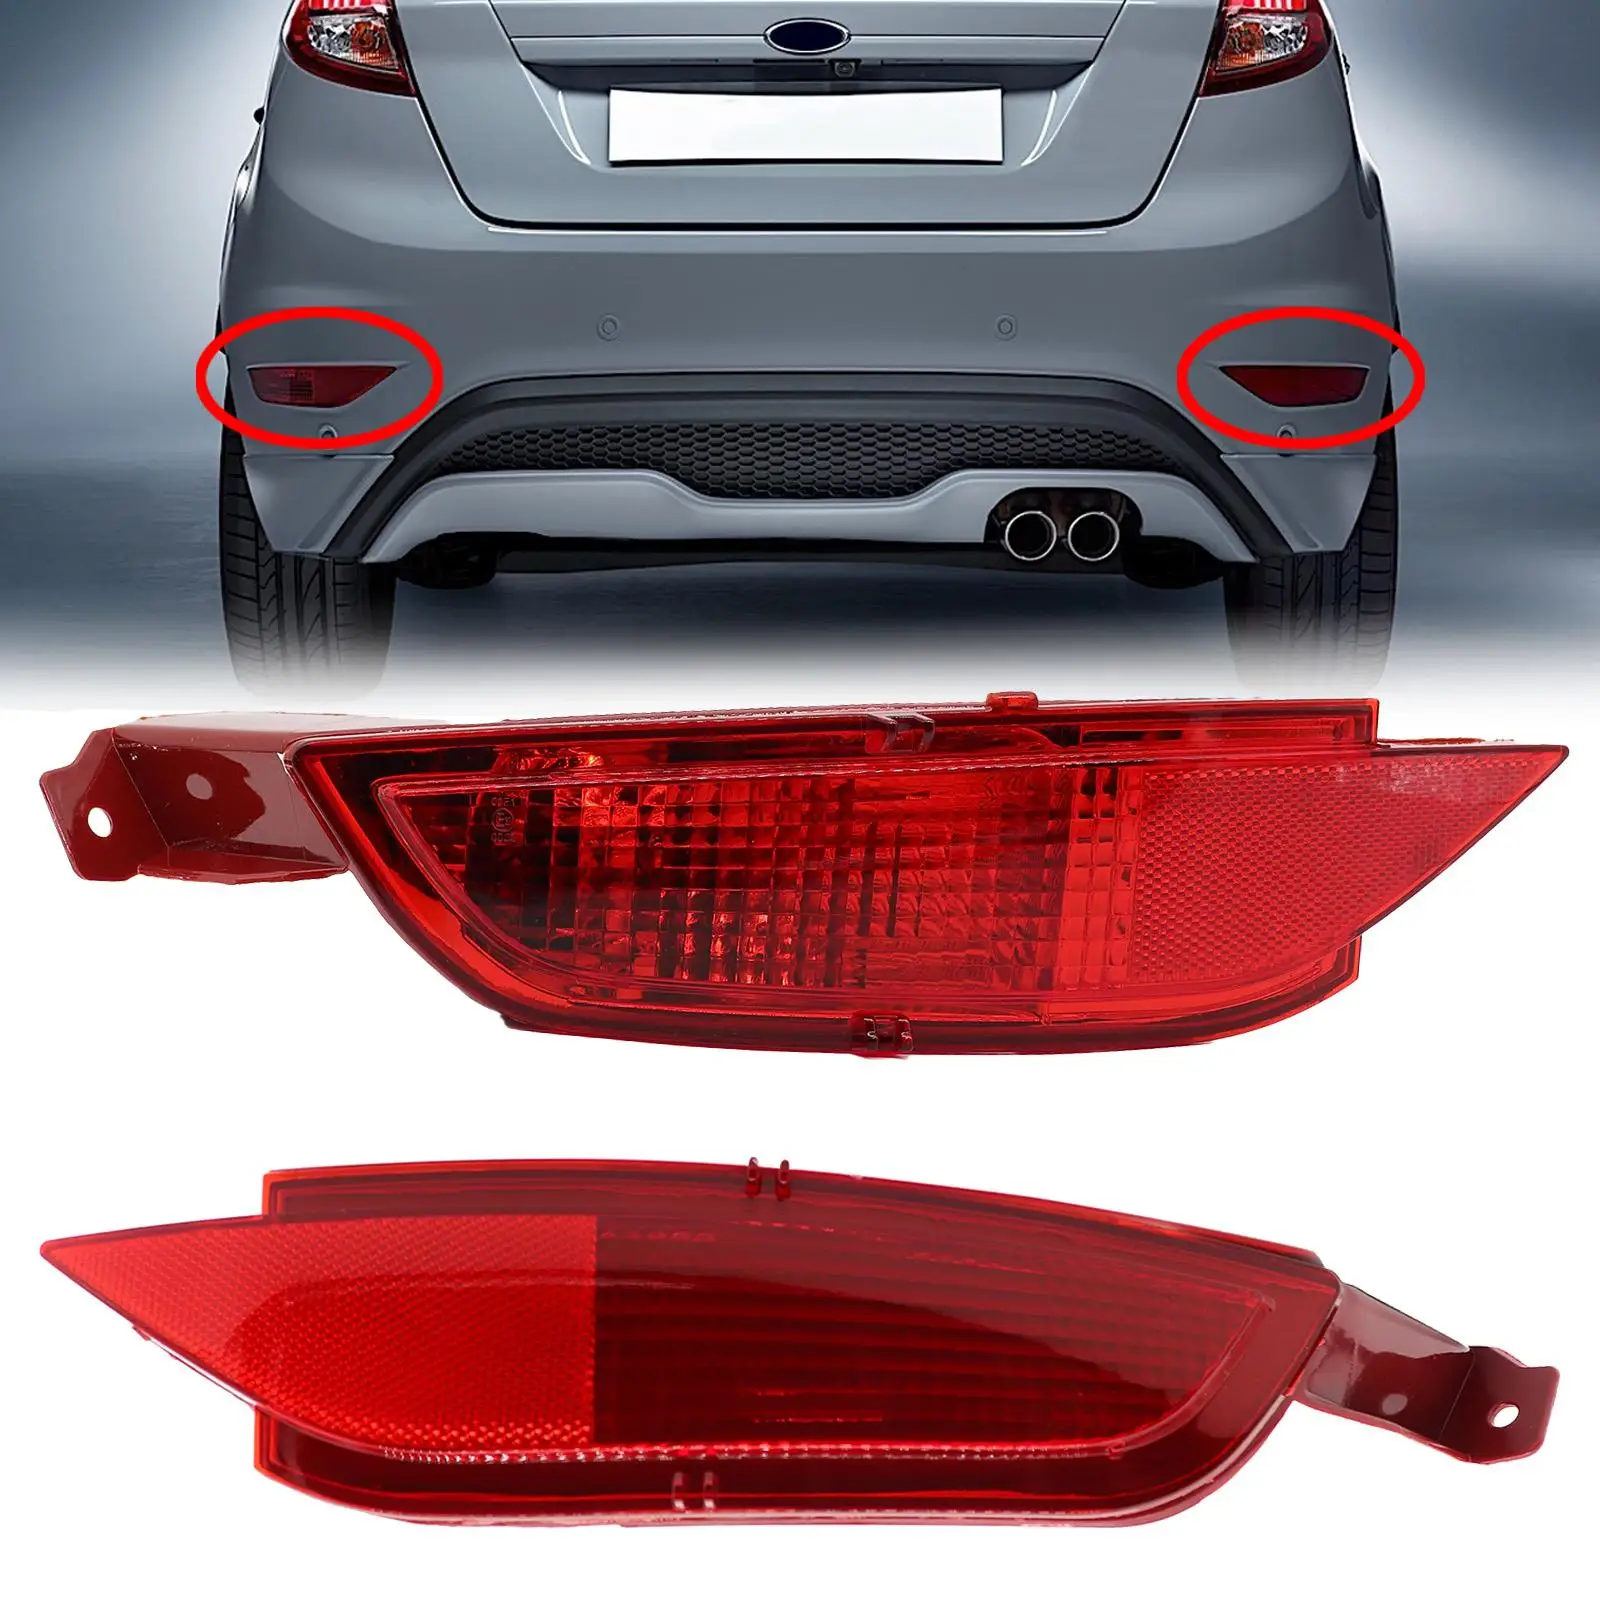 L/R Rear Bumper Reflective Signal Light Tail Fog Lamp Assembly For Ford Fiesta WT Mk7 2009-2014 CMAX 2010-2015 Replacement Parts